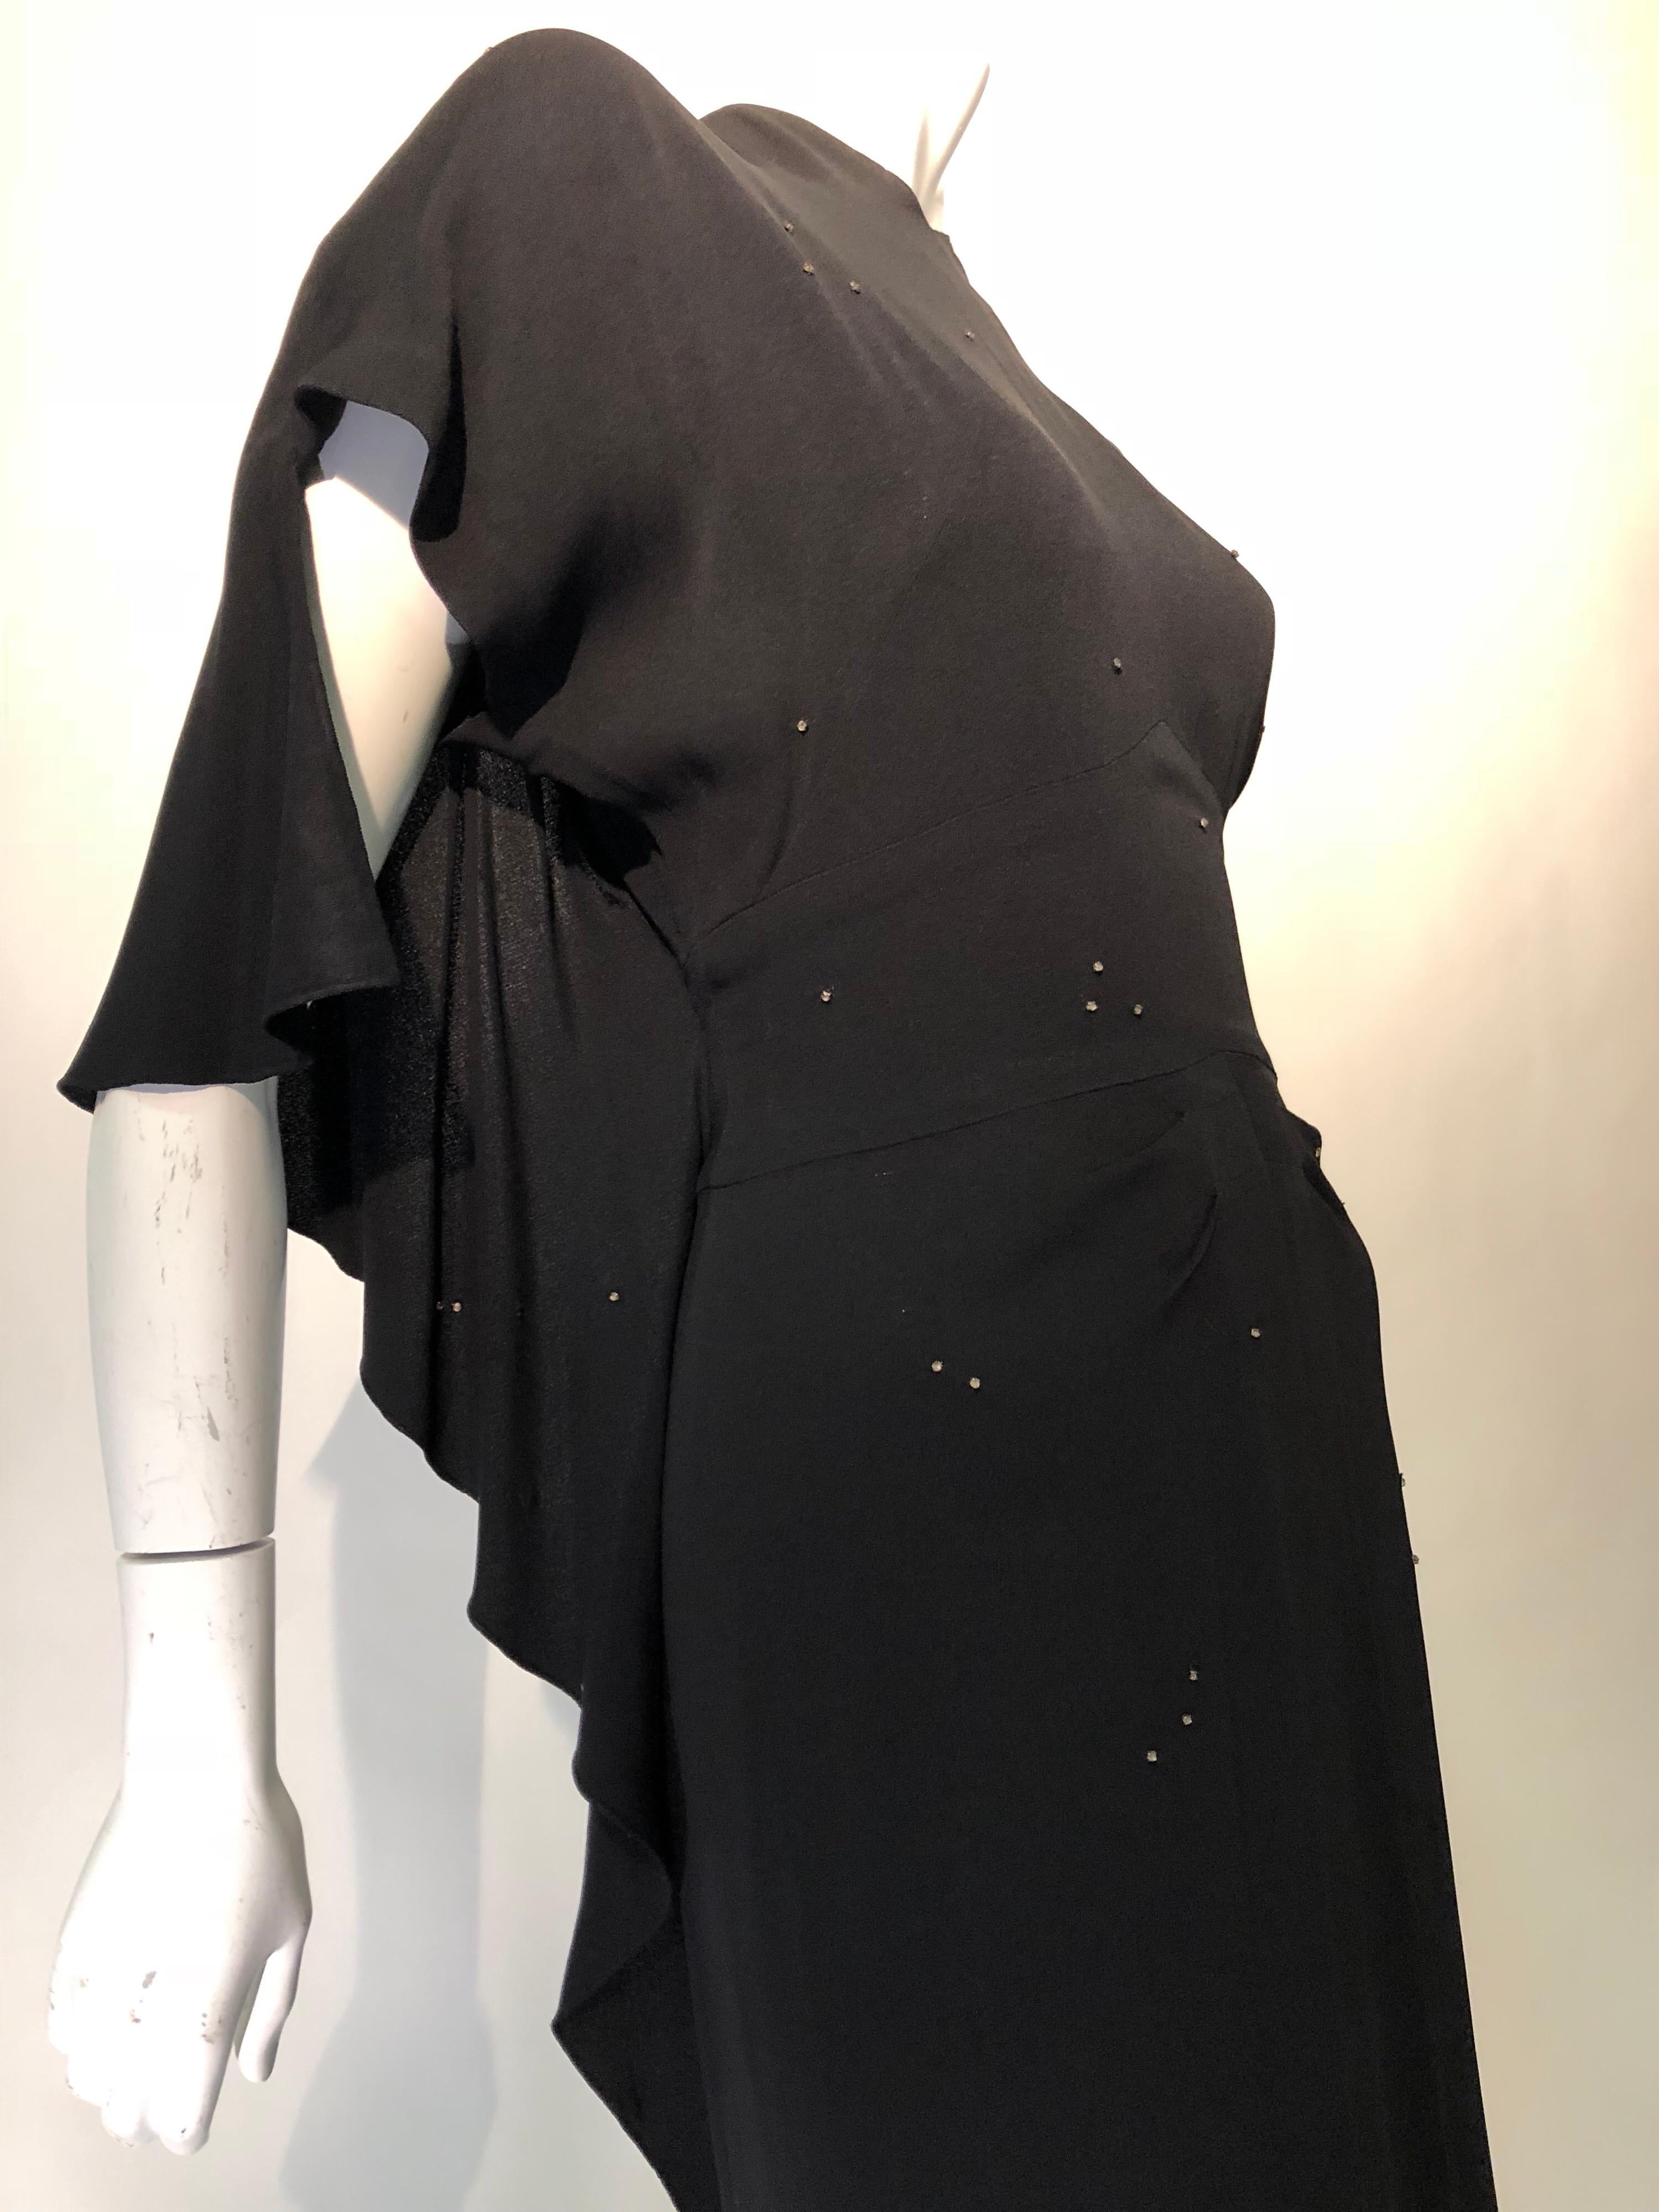 A rare mint condition 1940s Adrian evening gown of black silk crepe with dramatic draped back details, structured shoulders, fitted banded waist, back zipper, high V-neckline, pleated center-front drape and slit. In true Goddess style, this gown is